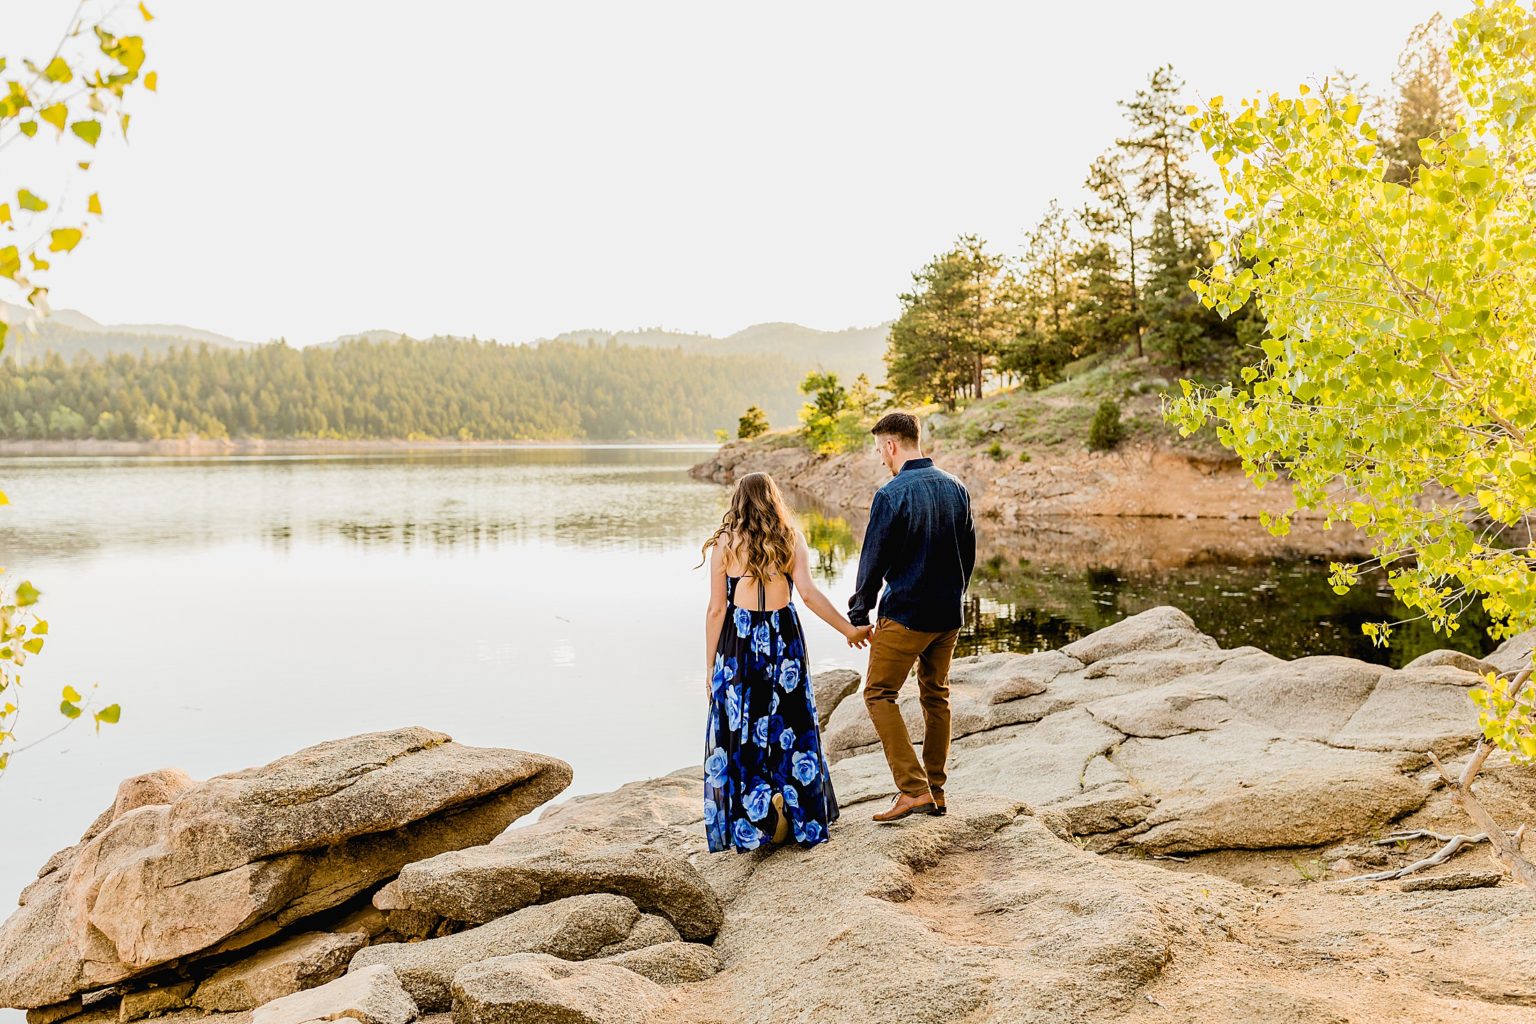 green mountain scenery and lake background with a couple celebrating wedding anniversary